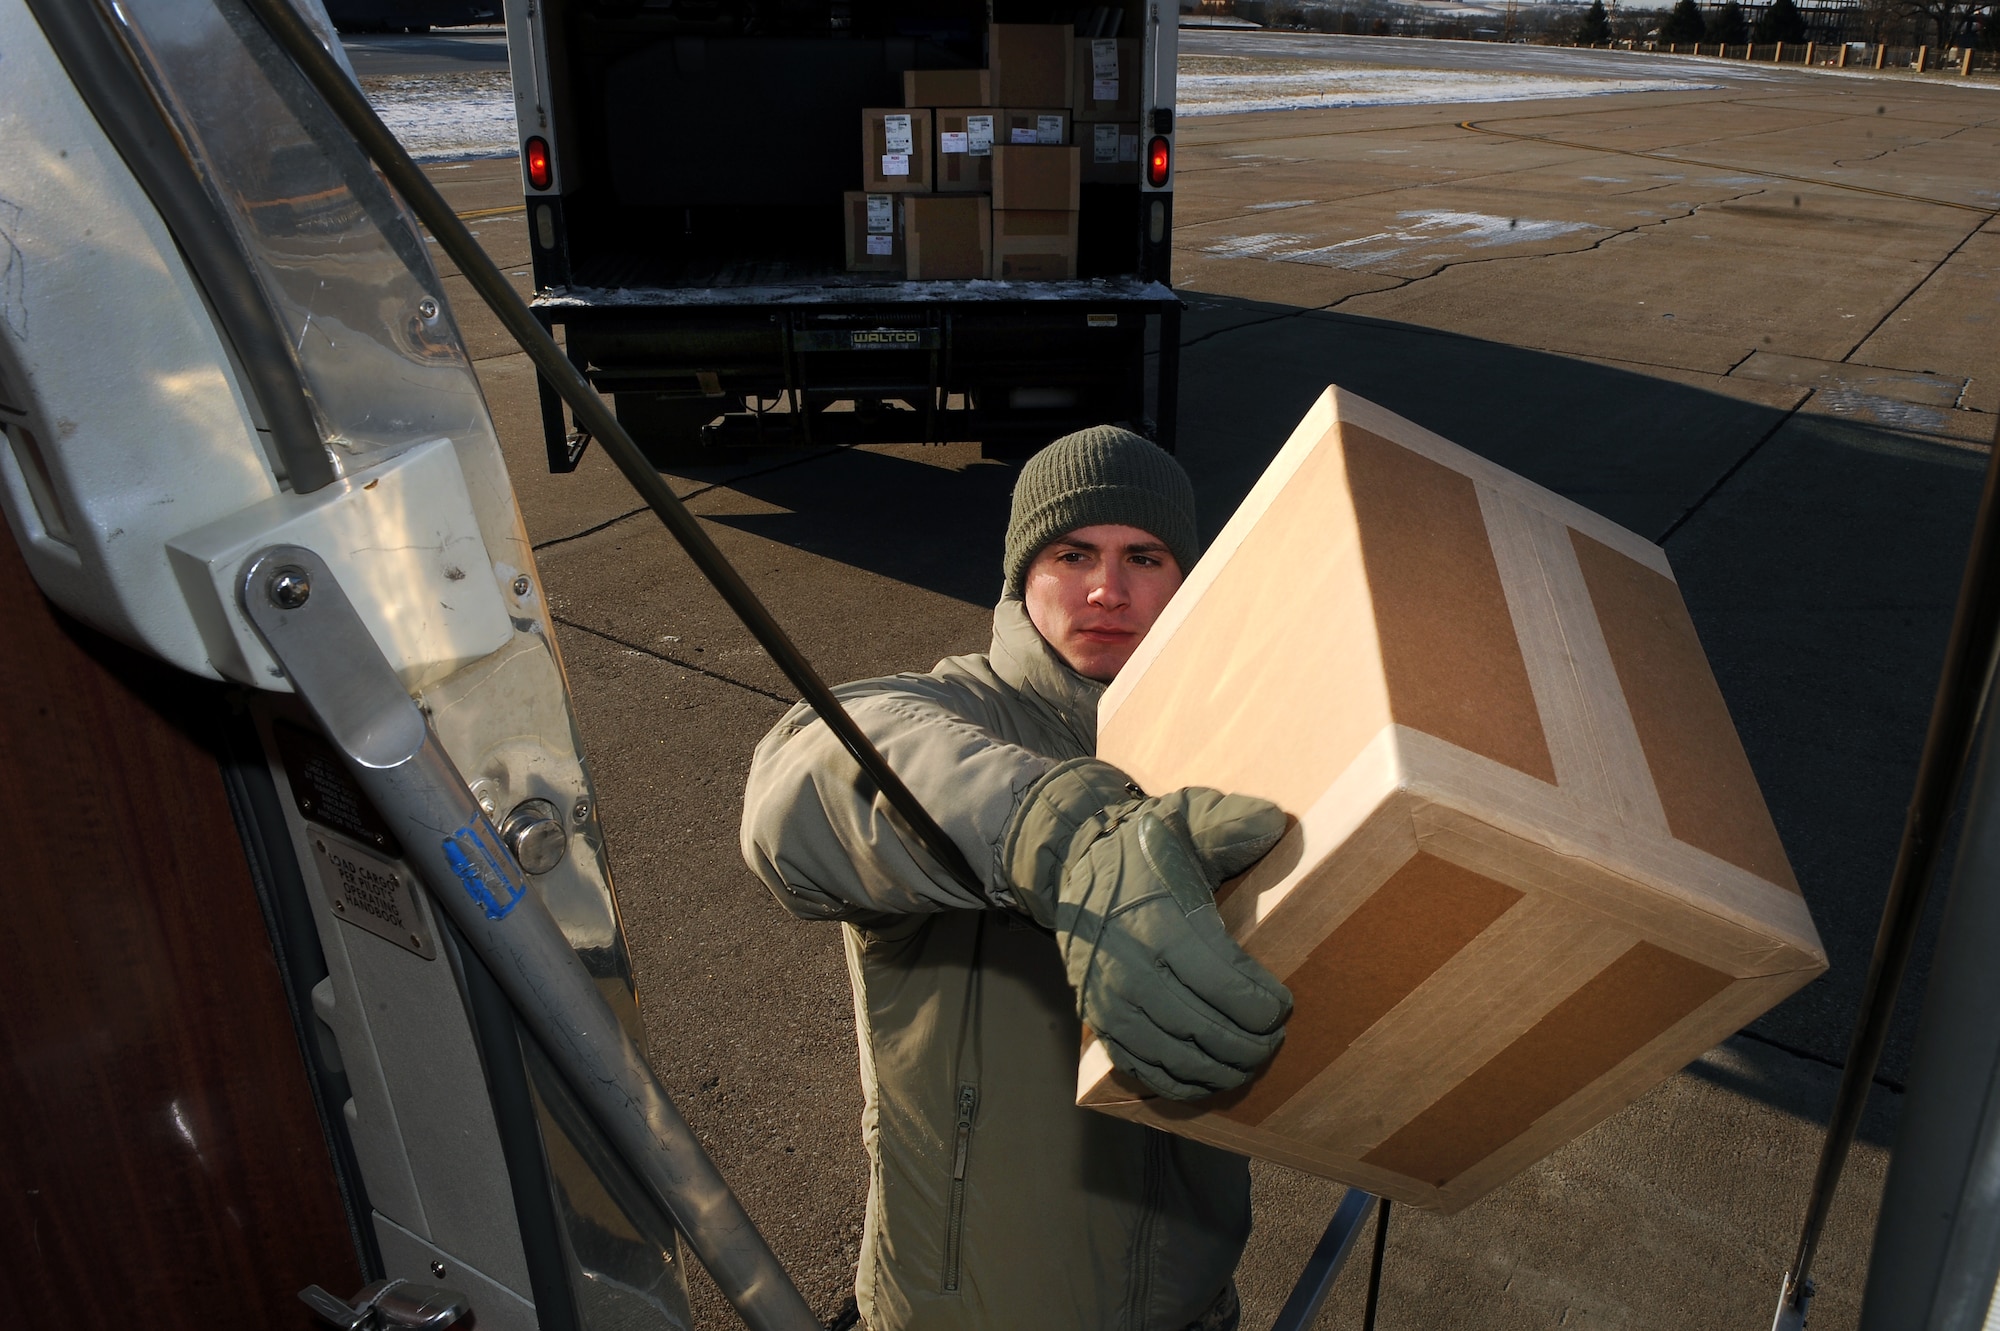 U.S. Air Force Staff Sgt. Jonathan Clay, a Defense Courier Station Offutt courier, transfers packages from a box truck to the fuselage of a C-12 aircraft at Offutt Air Force Base, Neb., Nov. 18, 2014. Clay along with another courier will hand deliver the packages at numerous points across the Midwest all within one duty day.  (U.S. Air Force photo by Josh Plueger/Released)